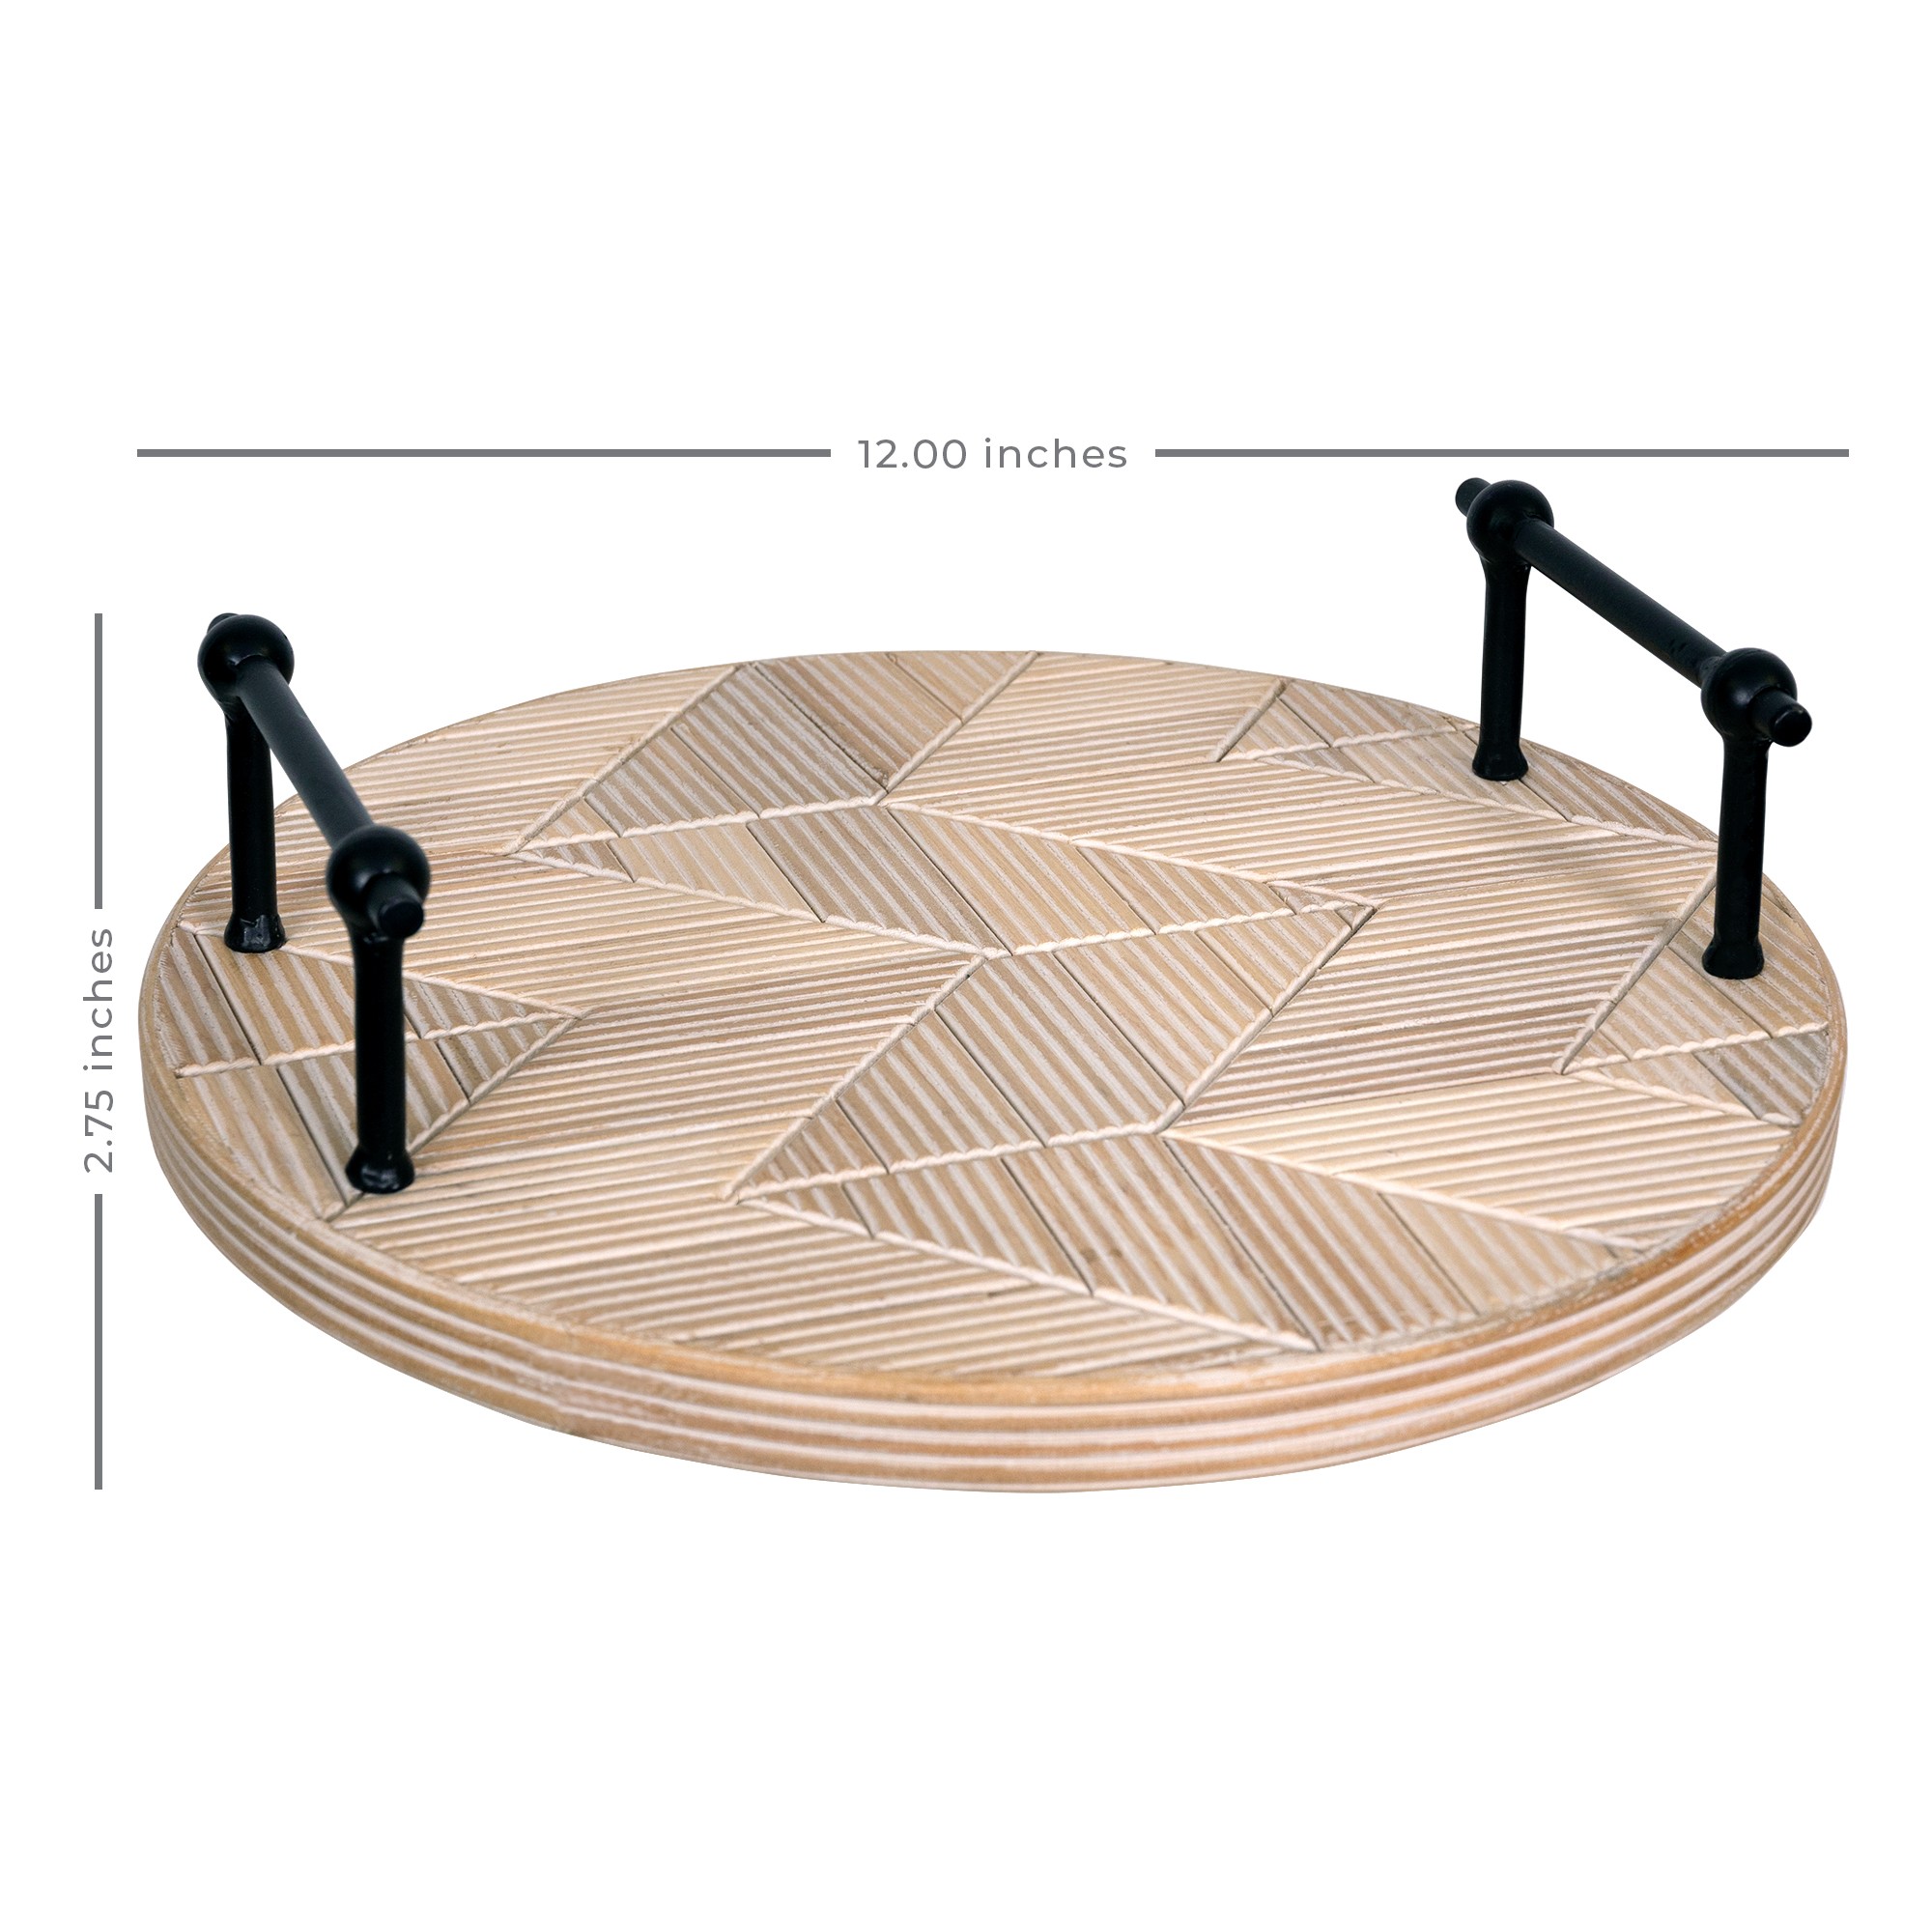 Modern Rustic Carved Chevron Round Tray with Handles